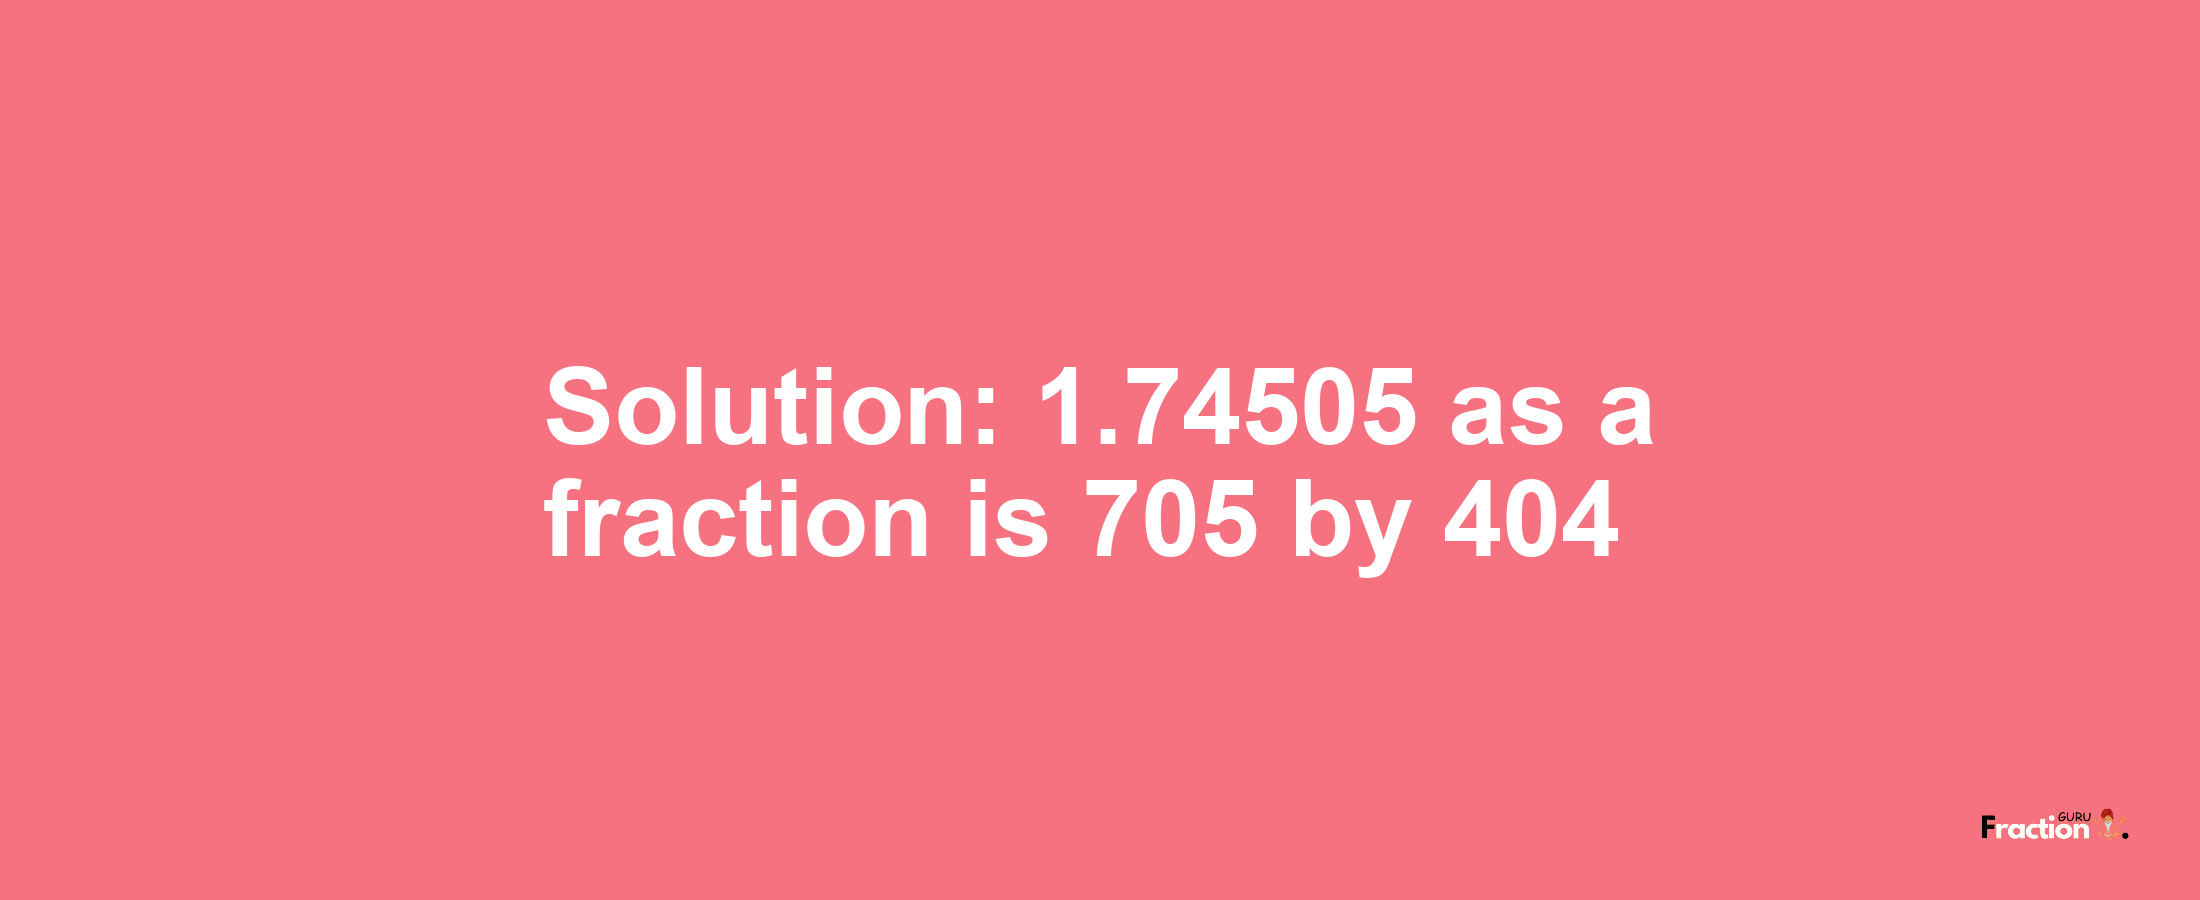 Solution:1.74505 as a fraction is 705/404